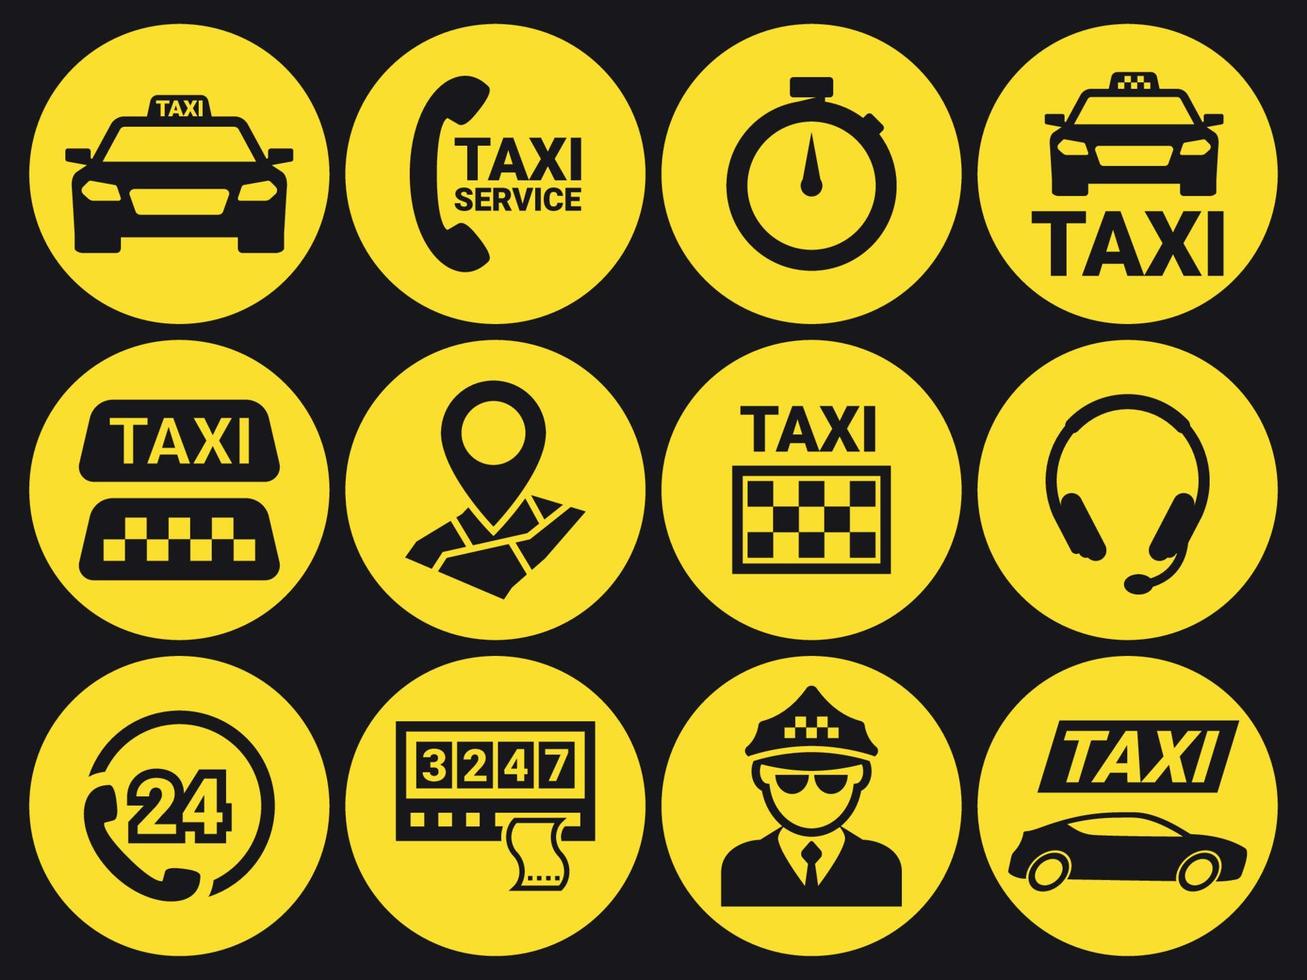 Taxi icons set. Black on a yellow background vector